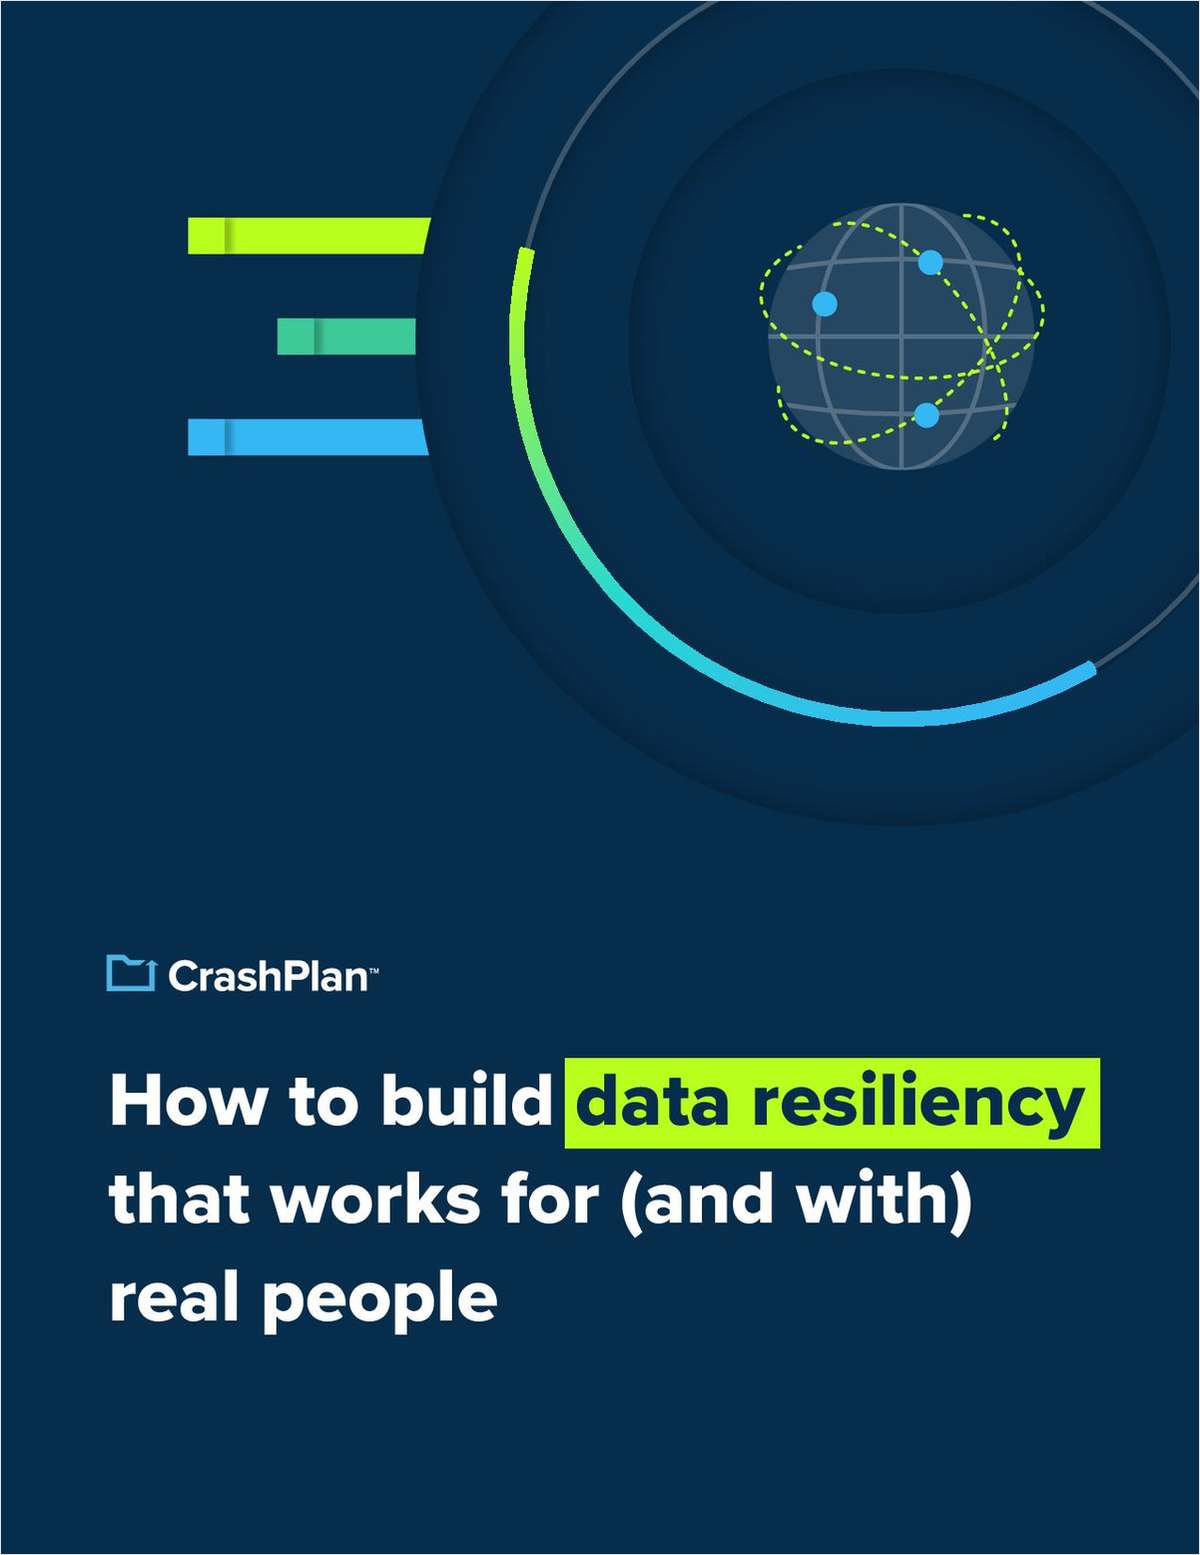 How to build data resiliency that works for (and with) real people